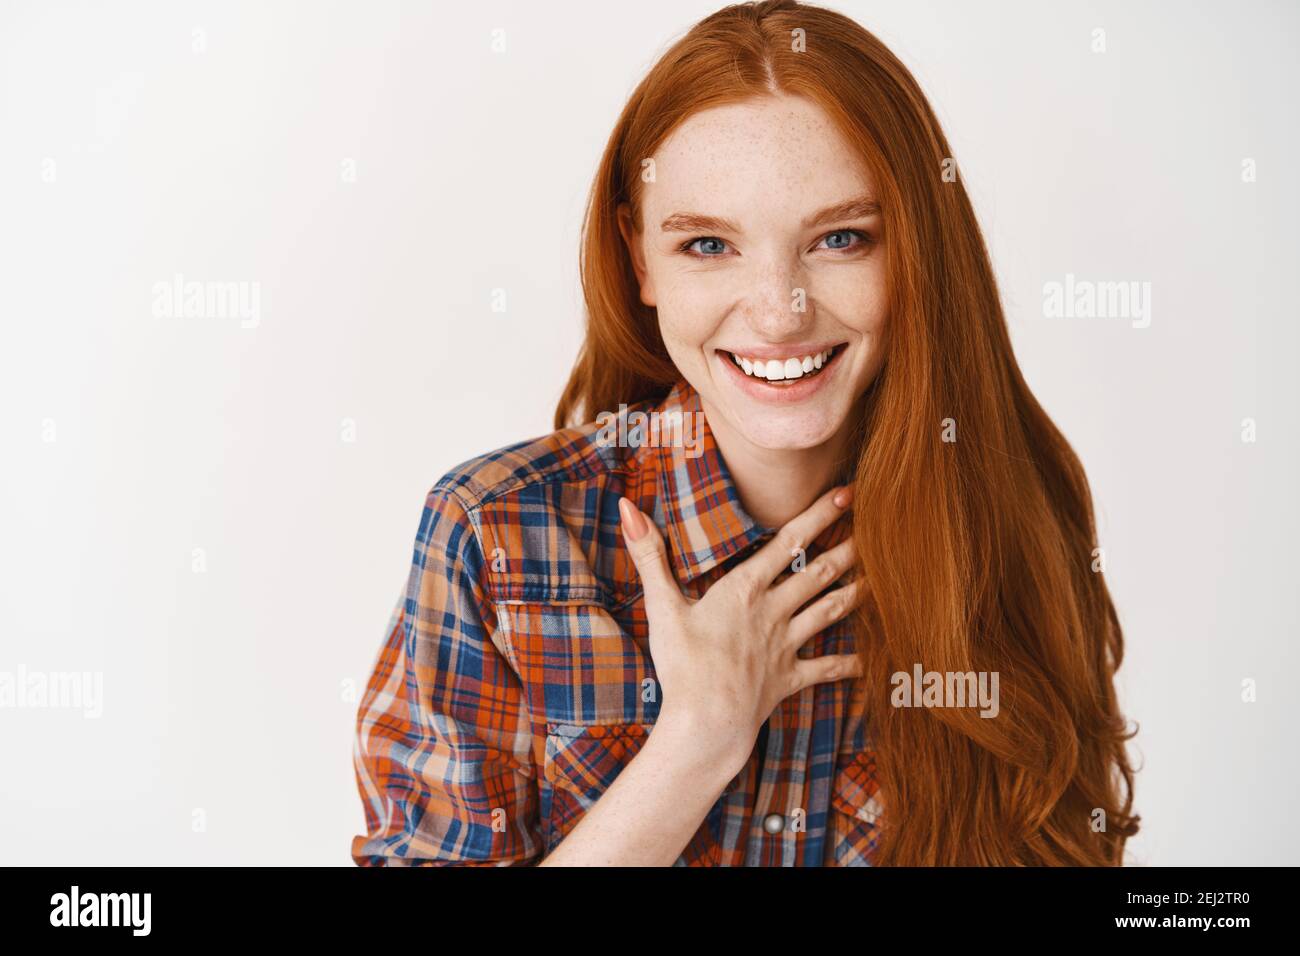 Close-up of beautiful redhead woman with pale skin and blue eyes, touching heart and smiling, thanking you, standing grateful against white background Stock Photo